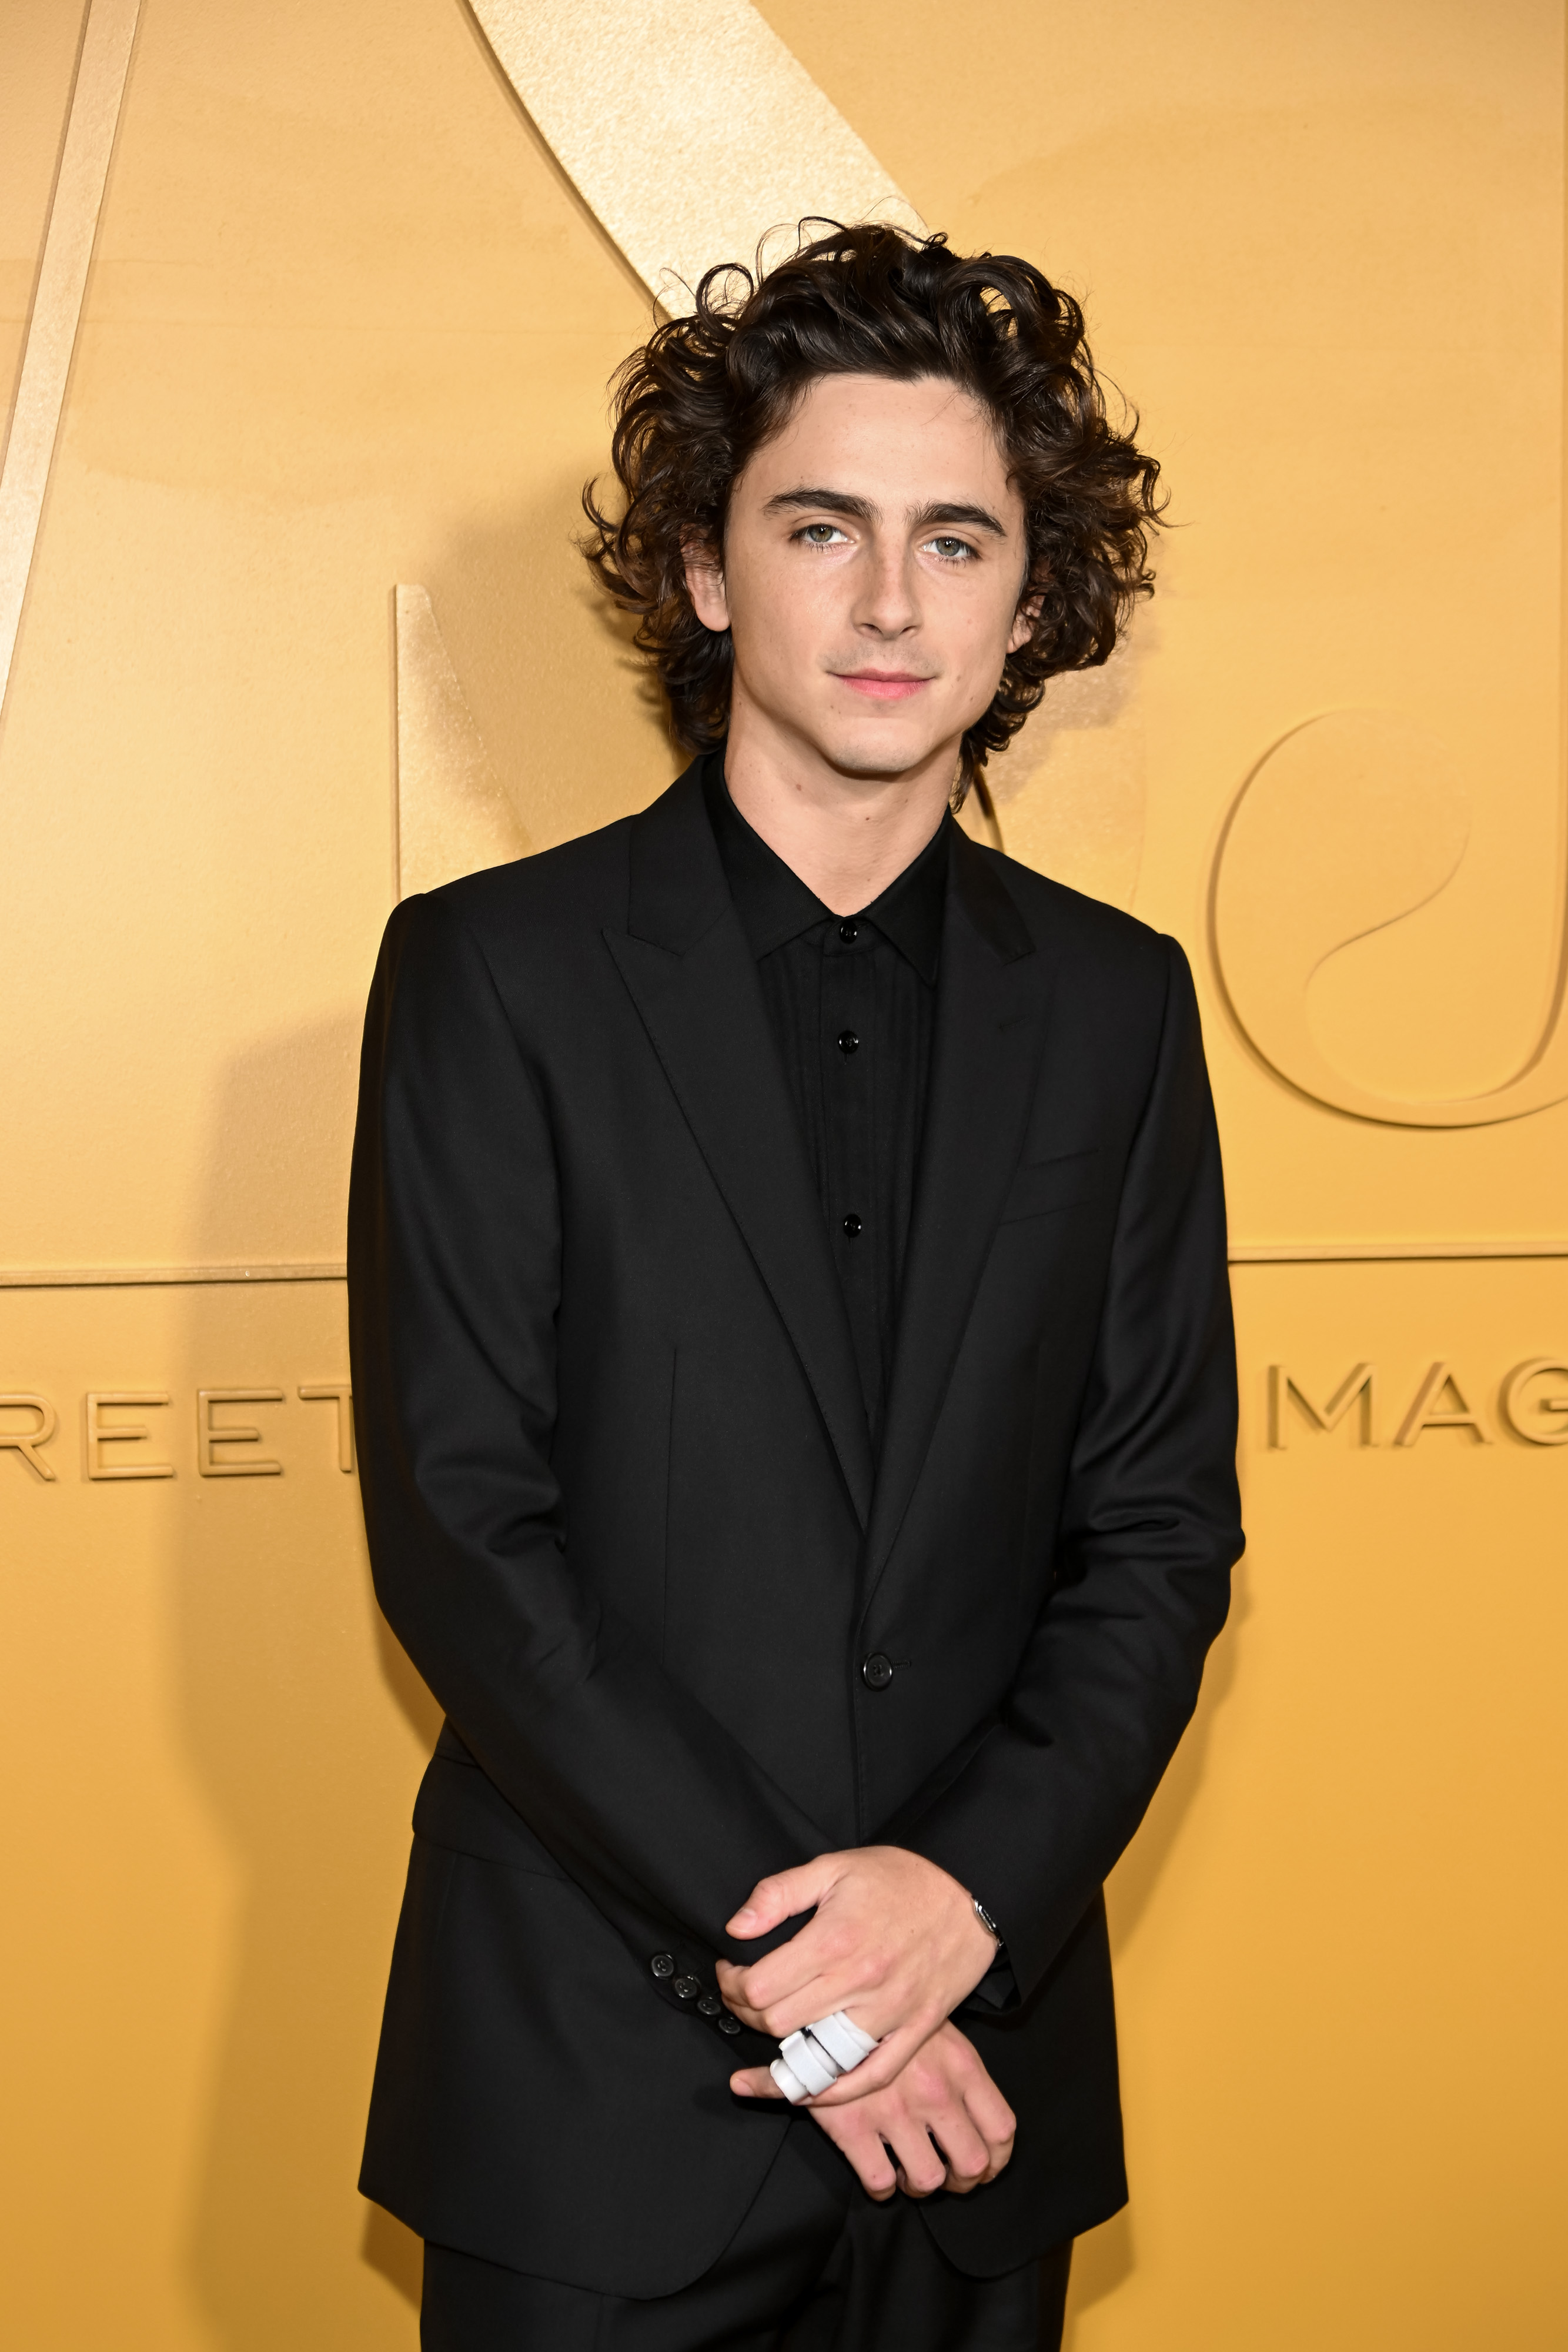 Timothée plays the lead in the film, portraying music icon Bob Dylan